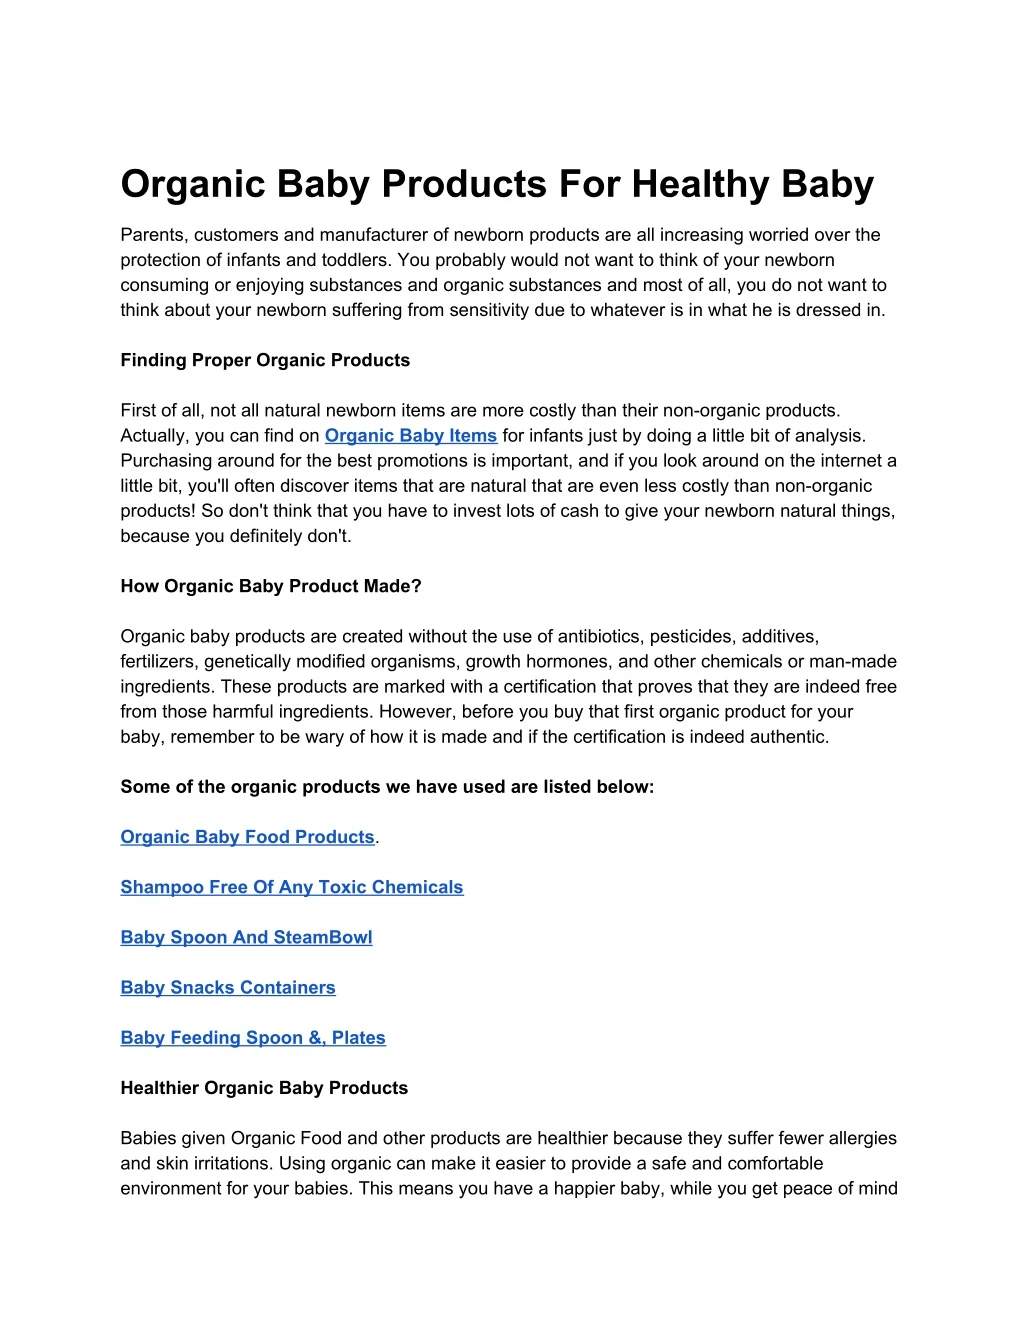 organic baby products for healthy baby n.